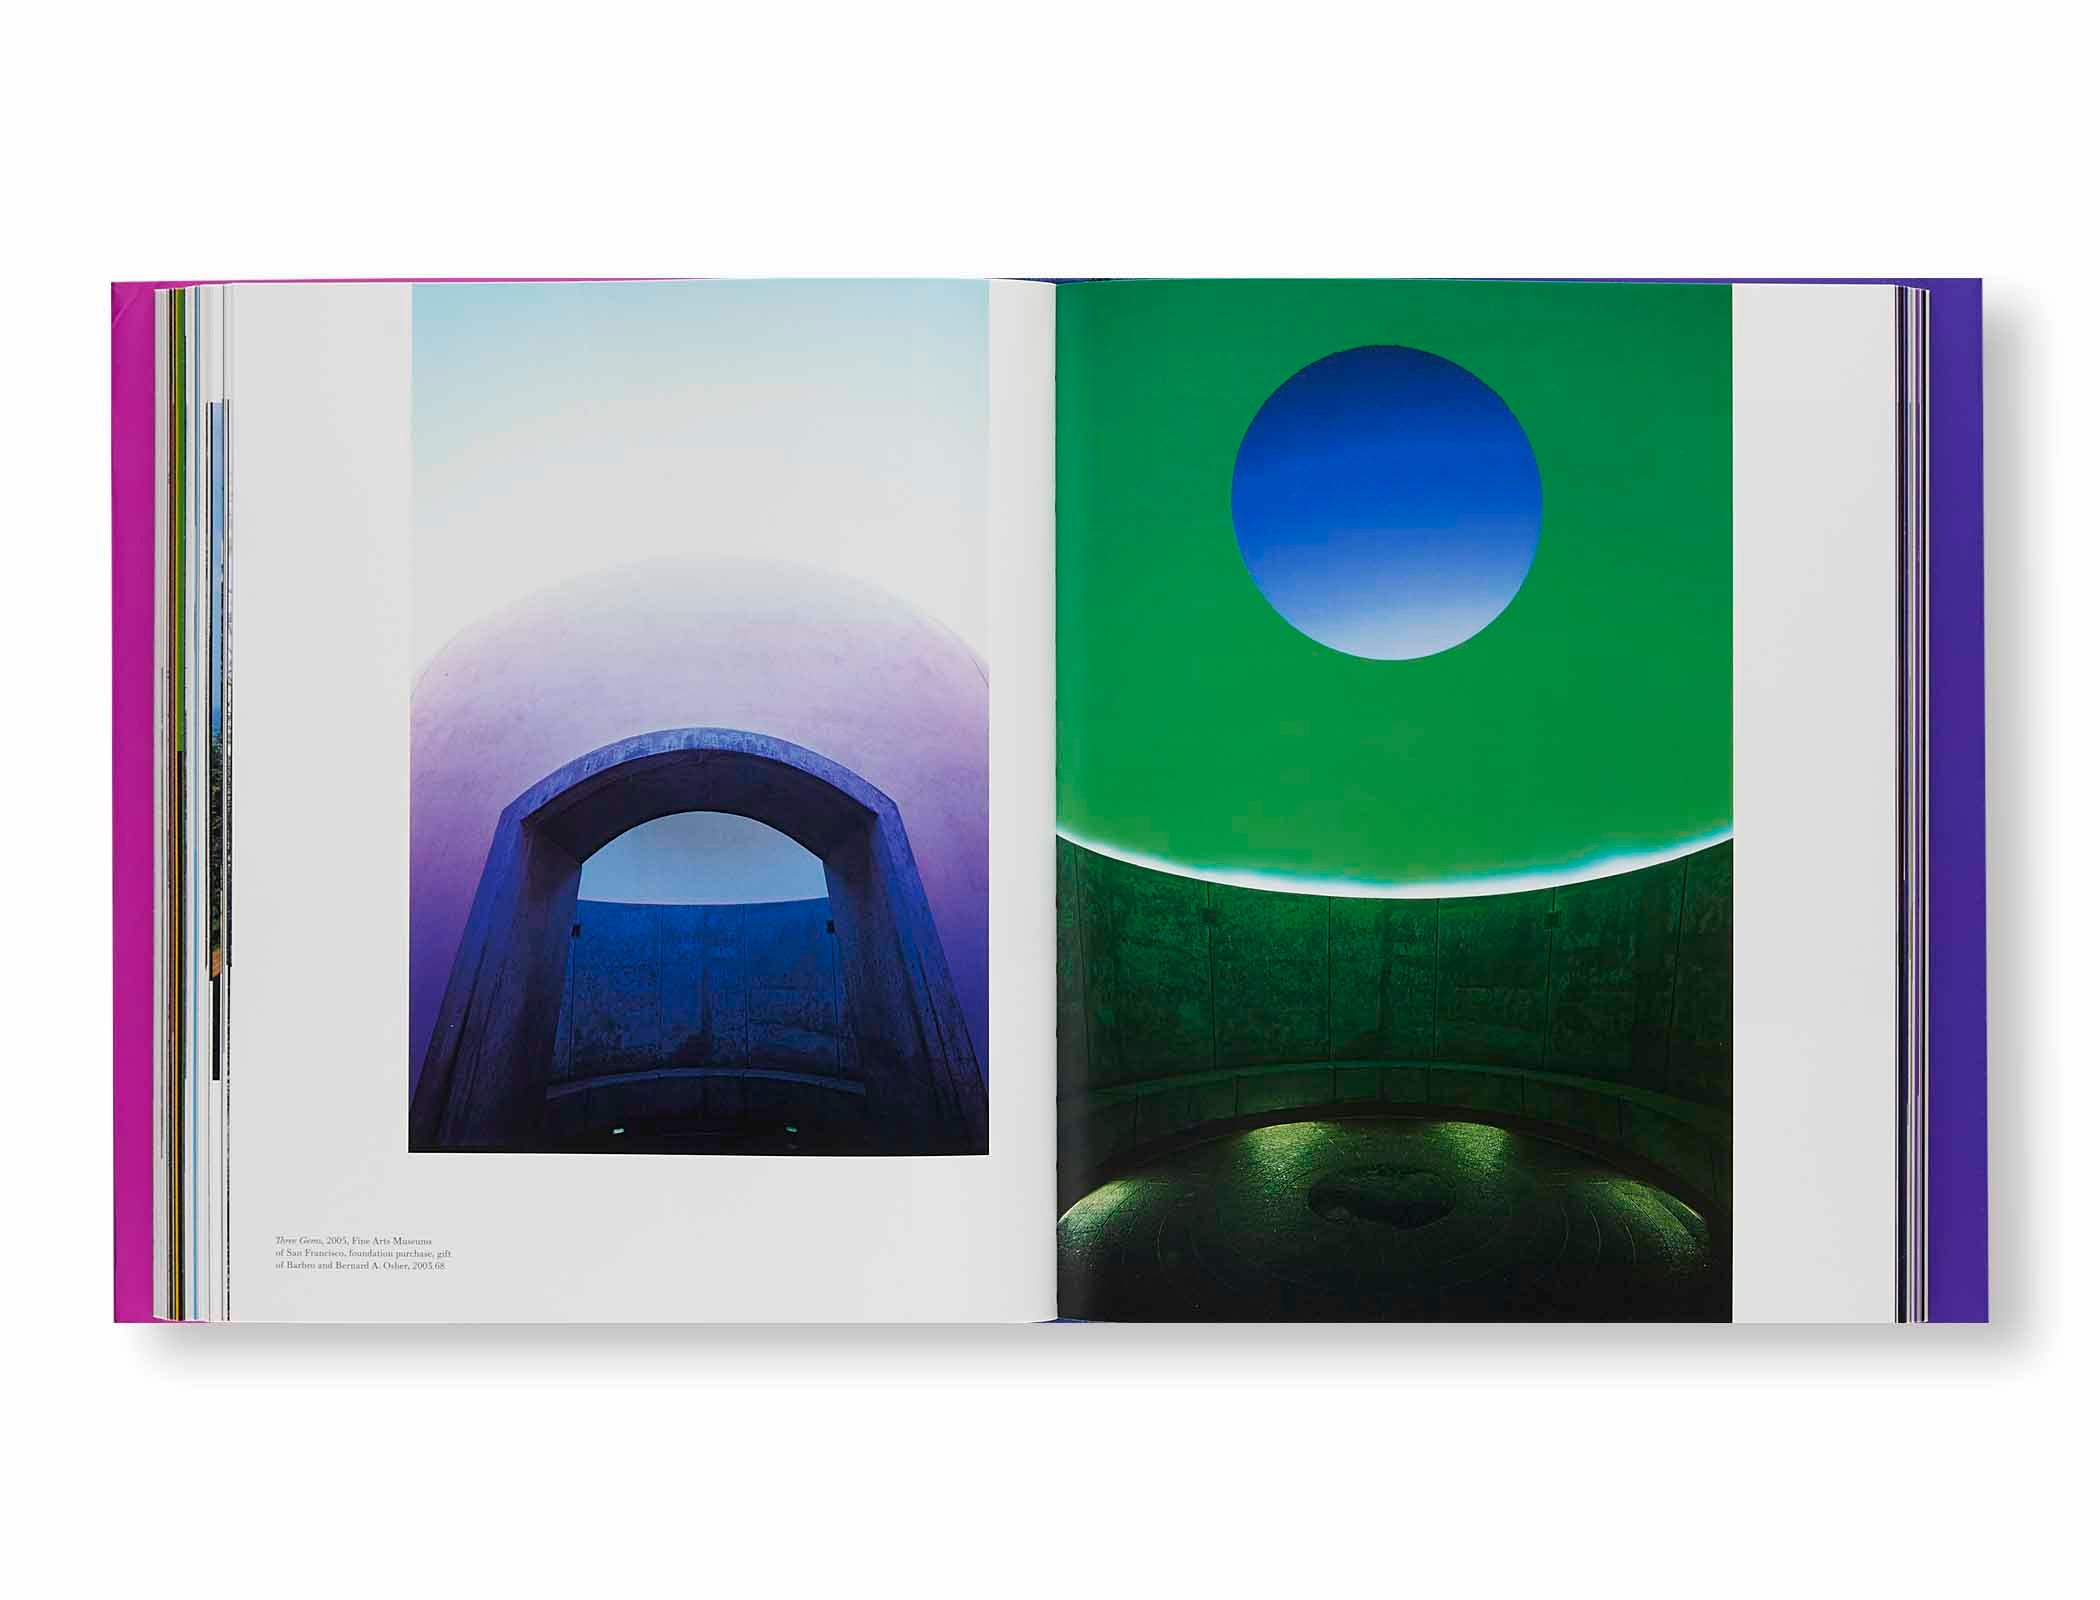 A RETROSPECTIVE by James Turrell